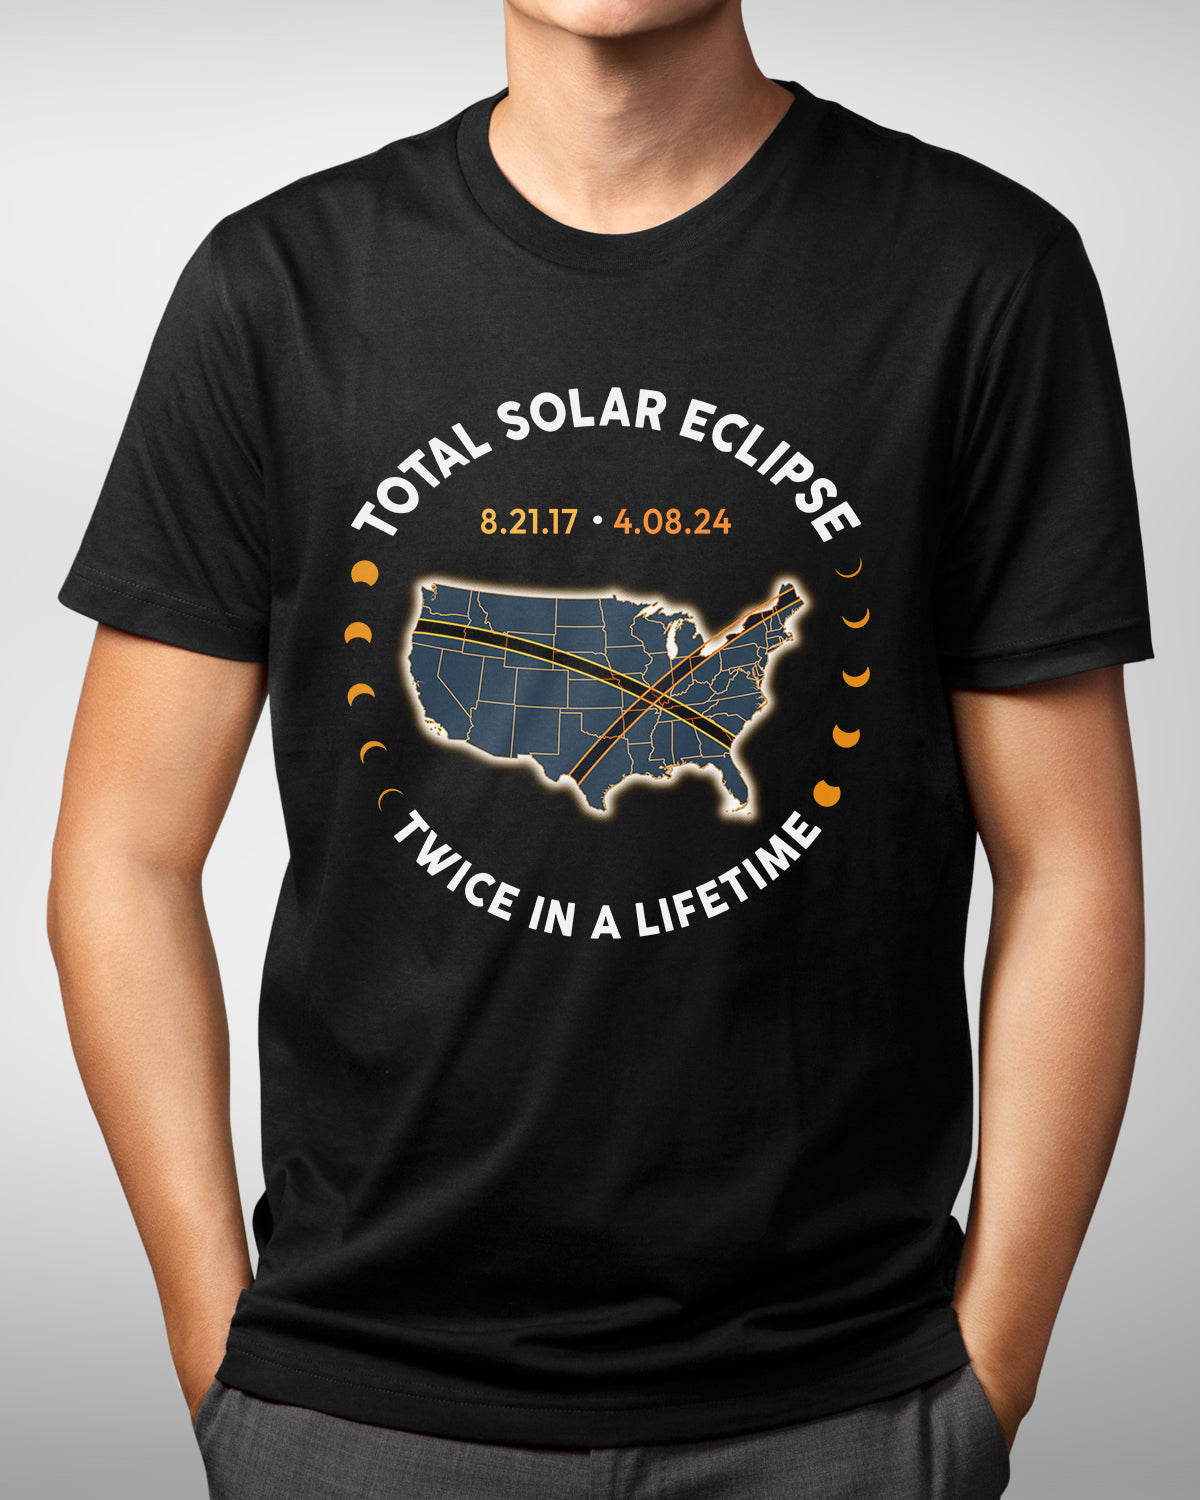 Twice in a Lifetime Solar Eclipse Shirt 2017-2024 - April 8, USA Map T